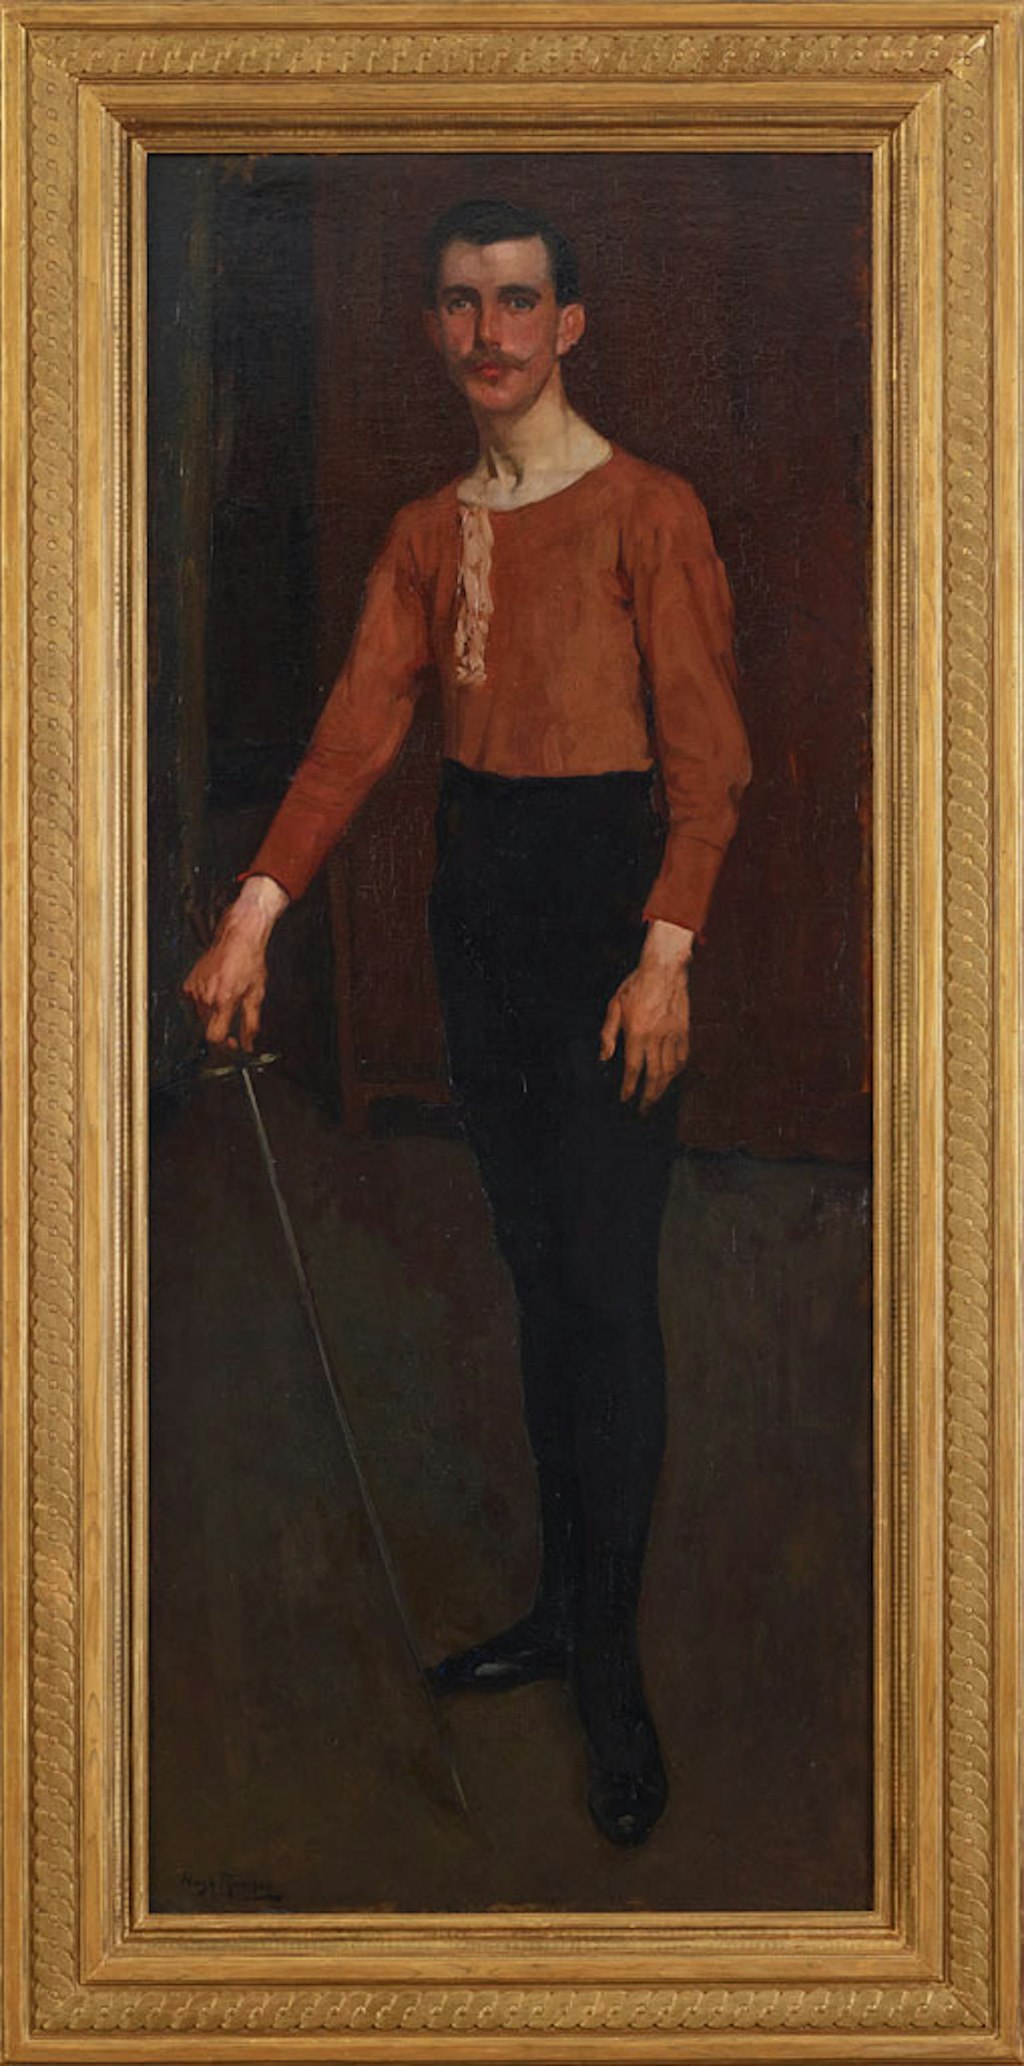 A long thin gold-framed painting of a moustachioed figure holding a sword.